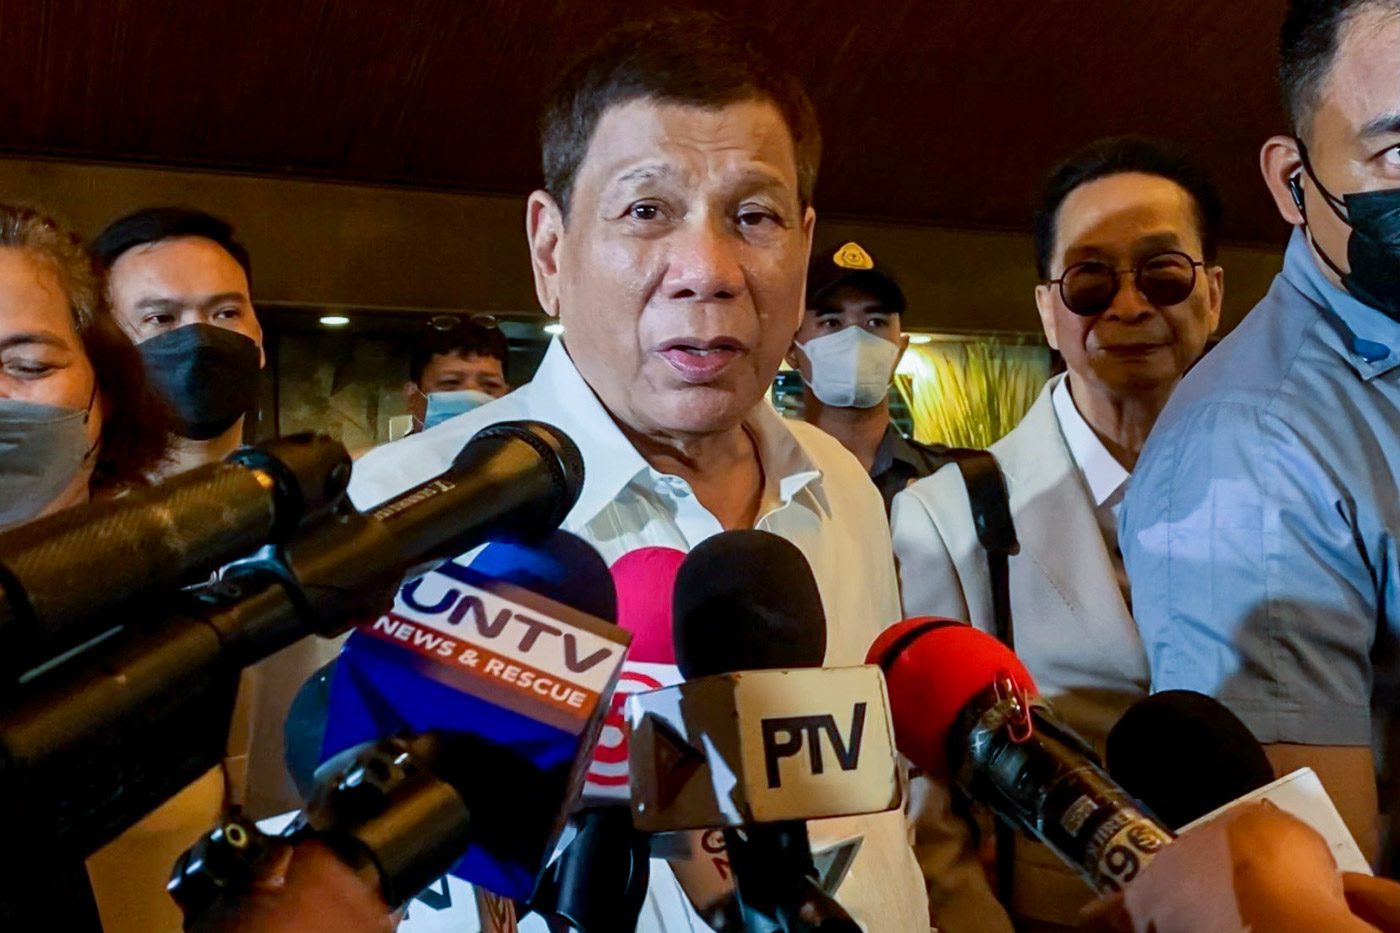 WATCH: In first public appearance in weeks, Duterte visits FVR wake, comments on ICC